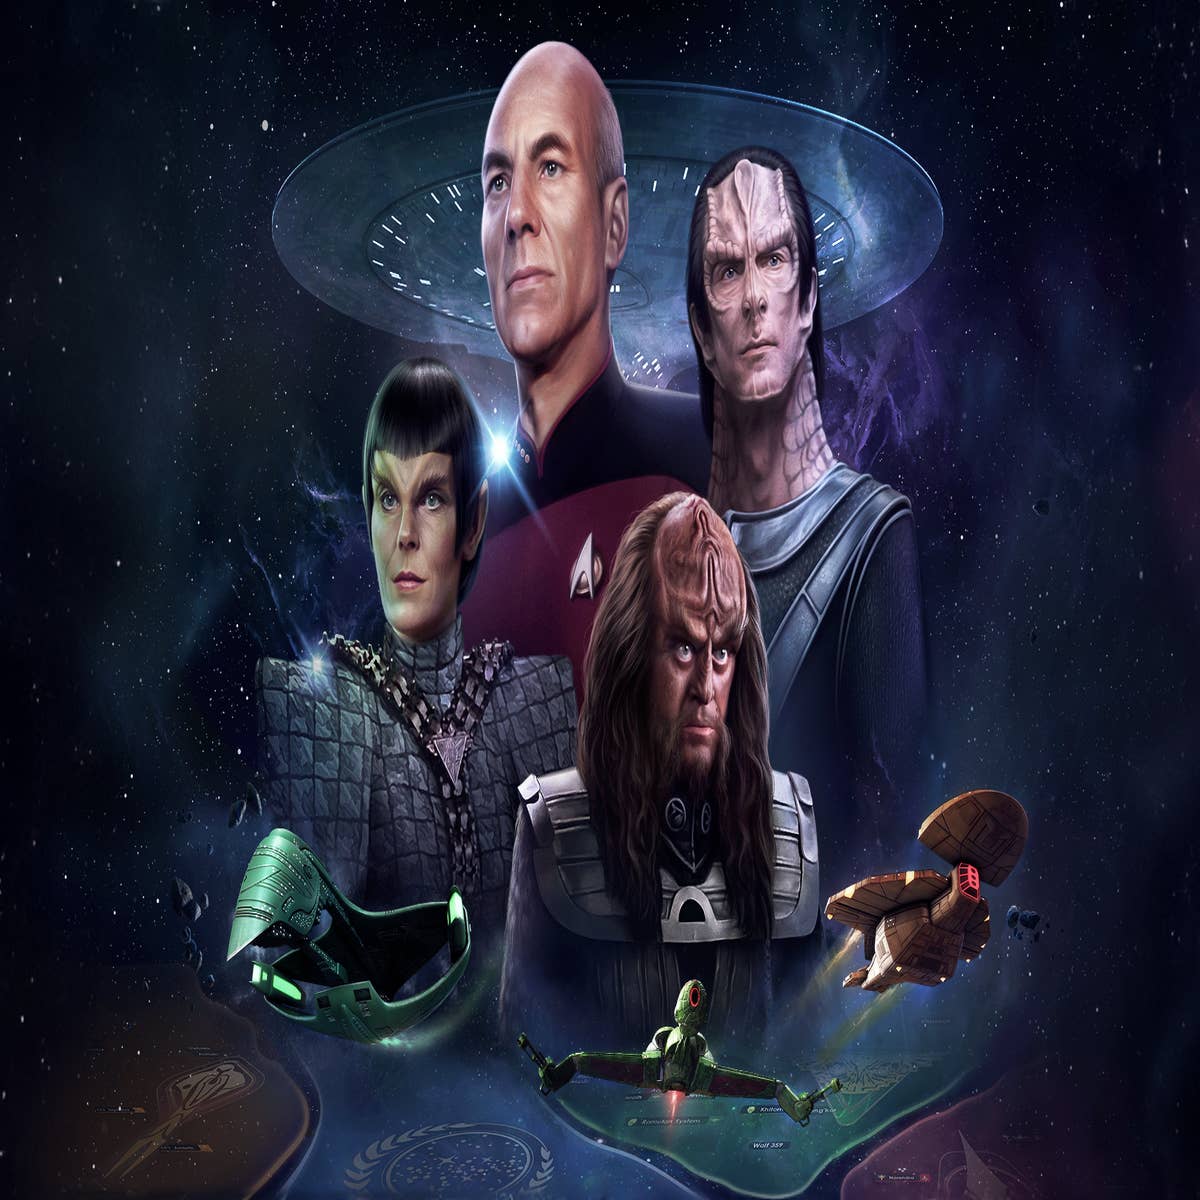 Star Trek: Infinite review - it's a good day to wait for mods